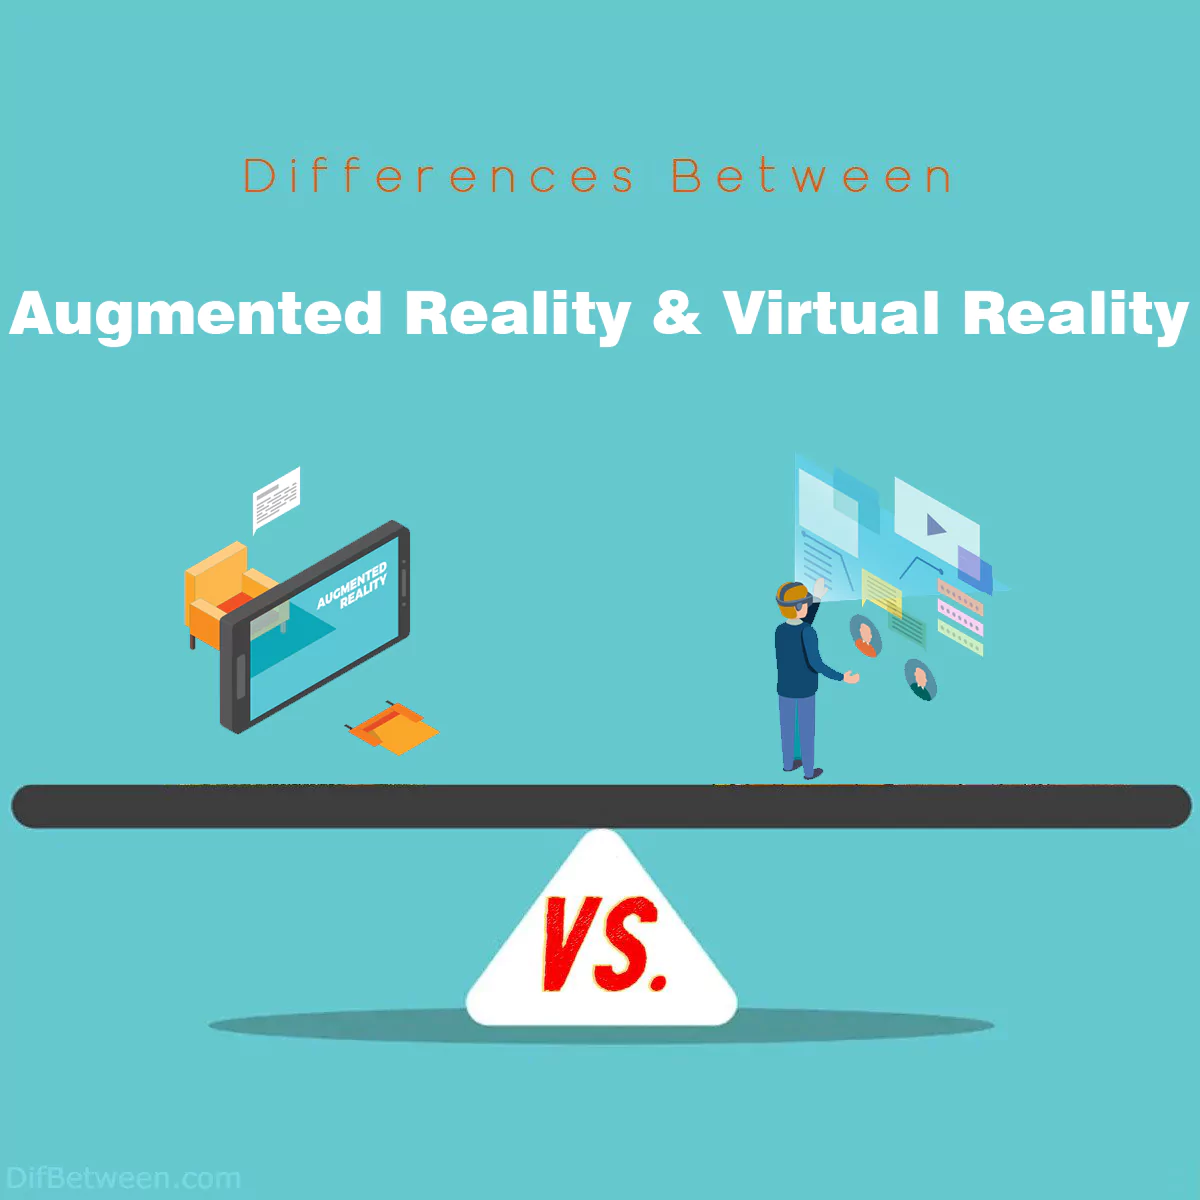 Differences Between Augmented Reality and Virtual Reality